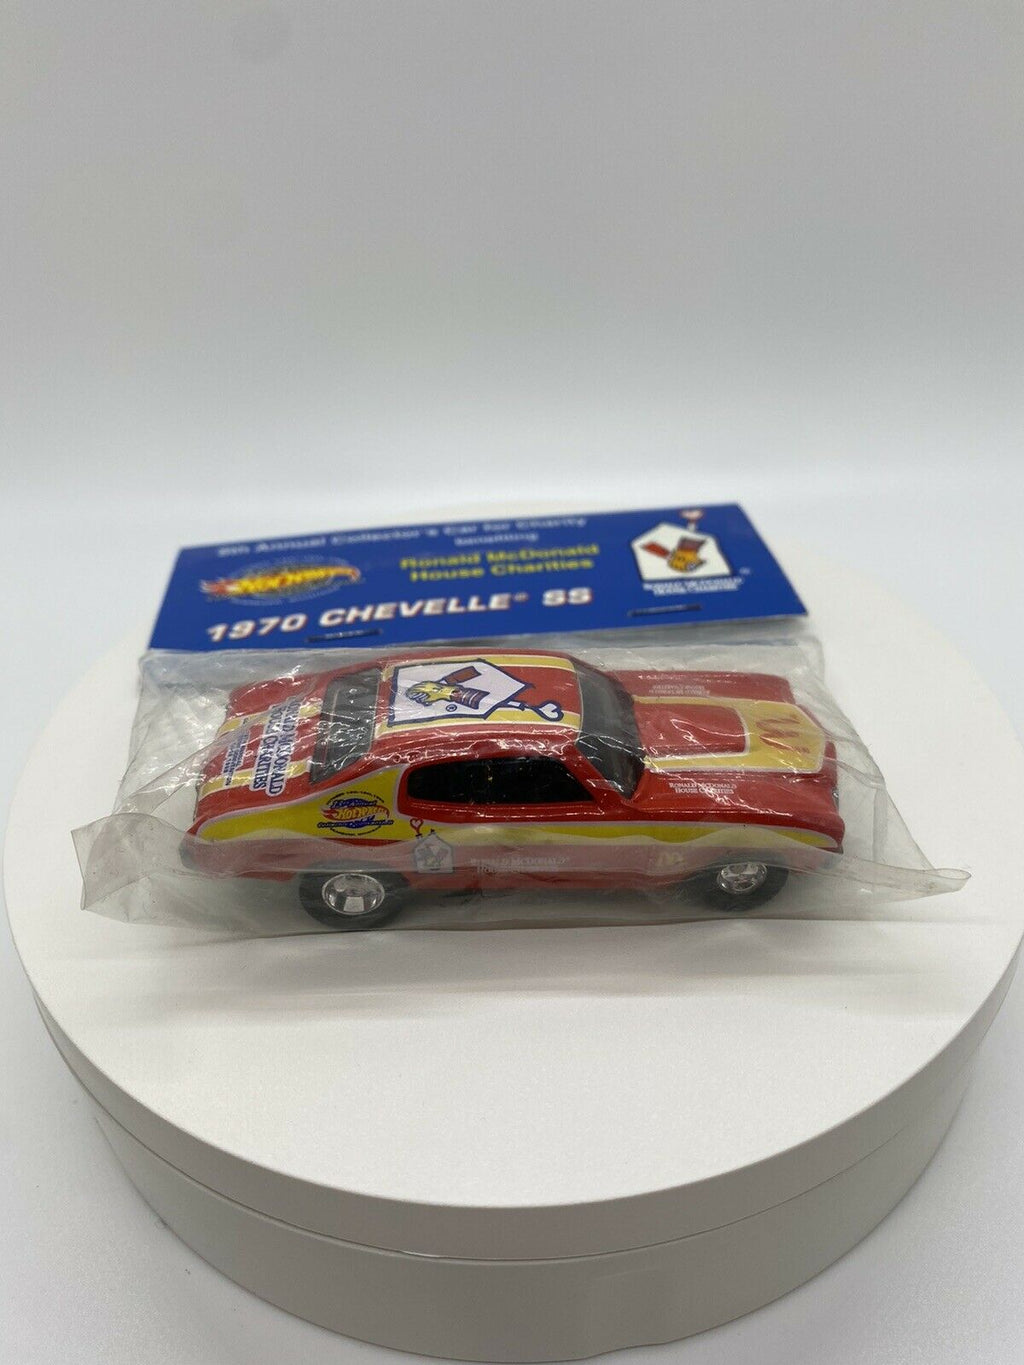 Hot Wheels Ronald McDonald 13th annual Collectors convention 1970 Chevelle ss